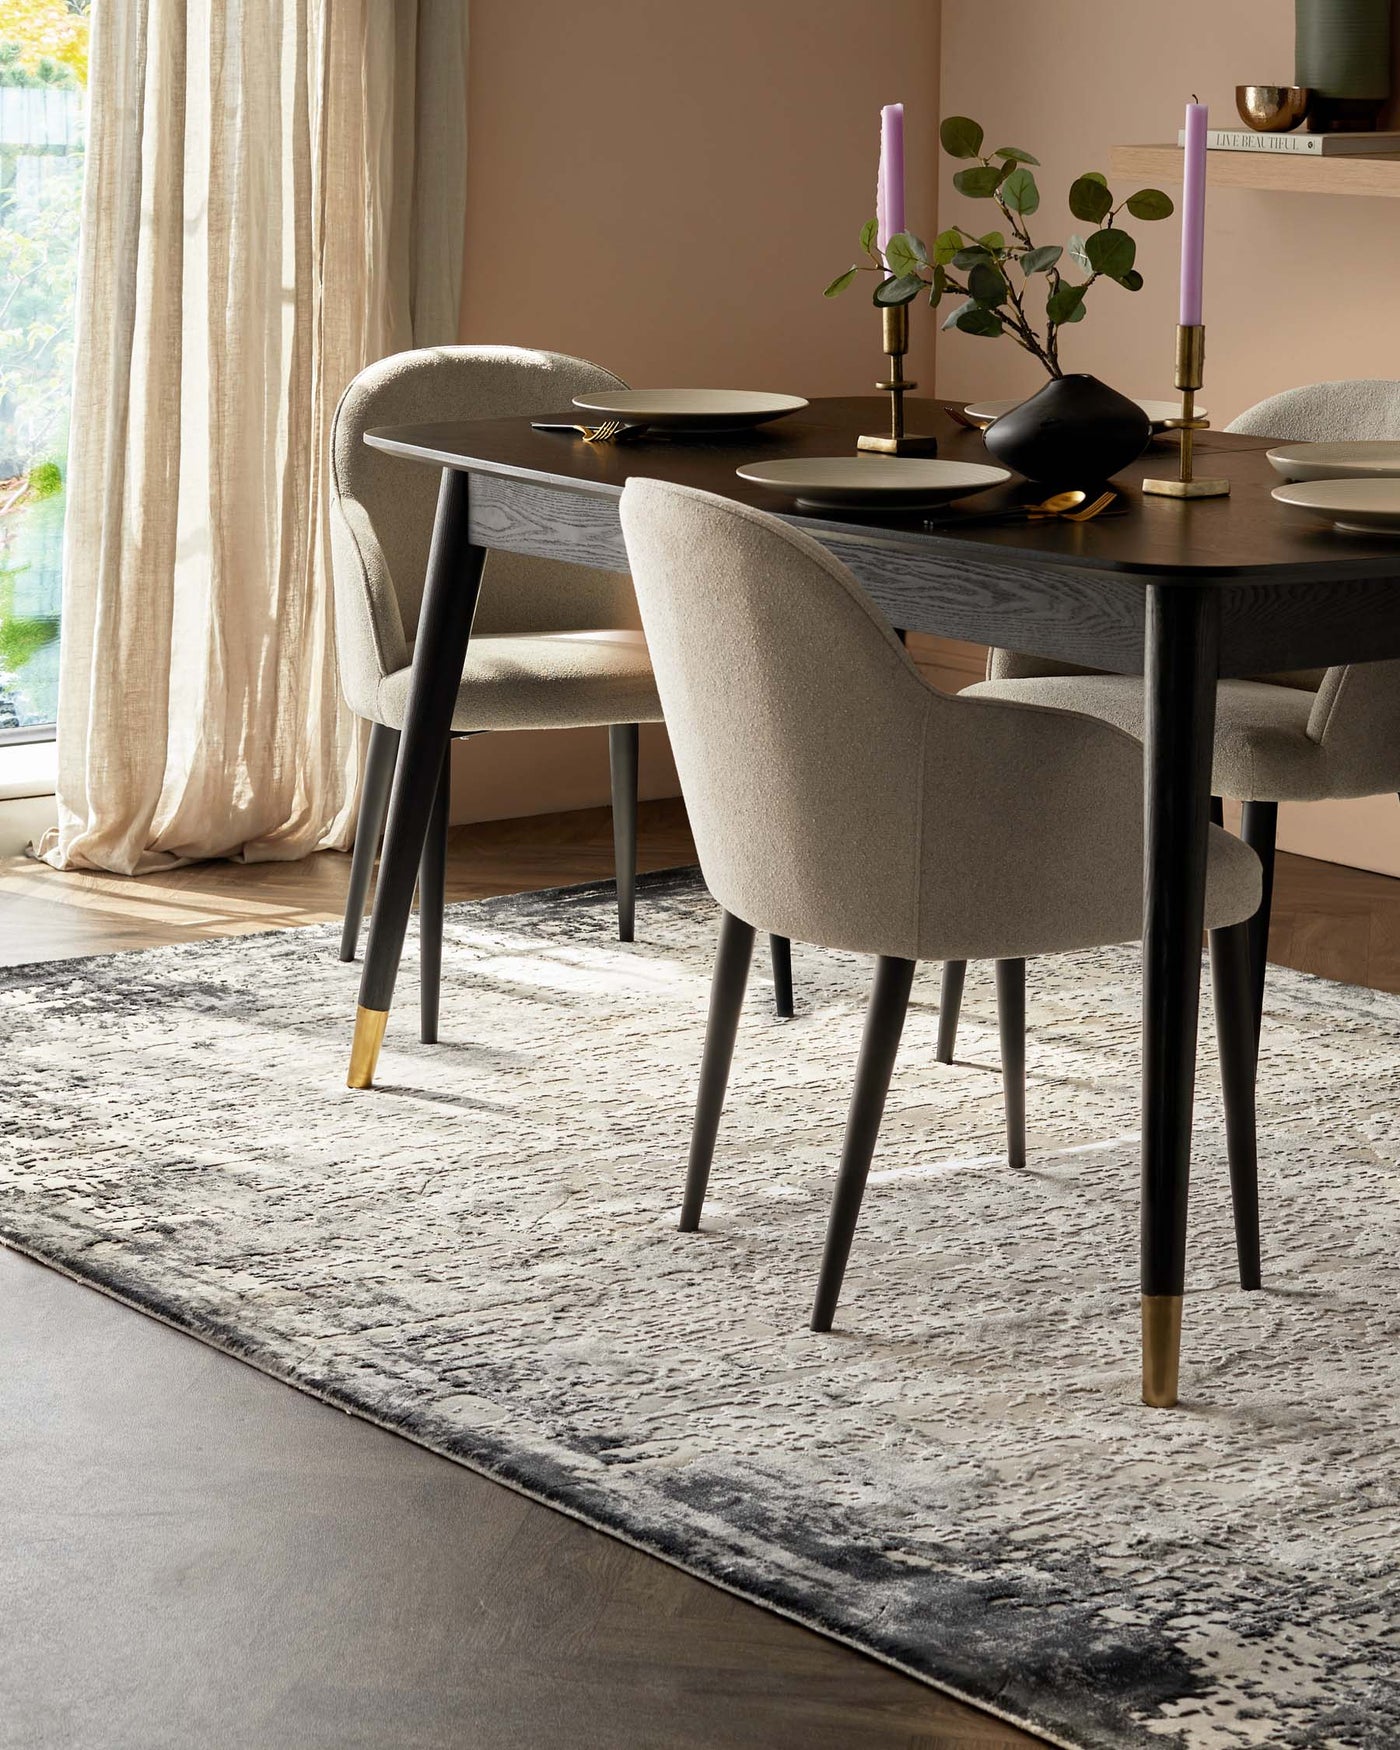 Elegant dining space featuring a dark wooden round table with a matte finish, flanked by four modern upholstered chairs in a light beige fabric with black legs tipped with gold accents. The setup is placed on a textured cream and grey area rug, enhancing the warm and contemporary ambiance of the room.